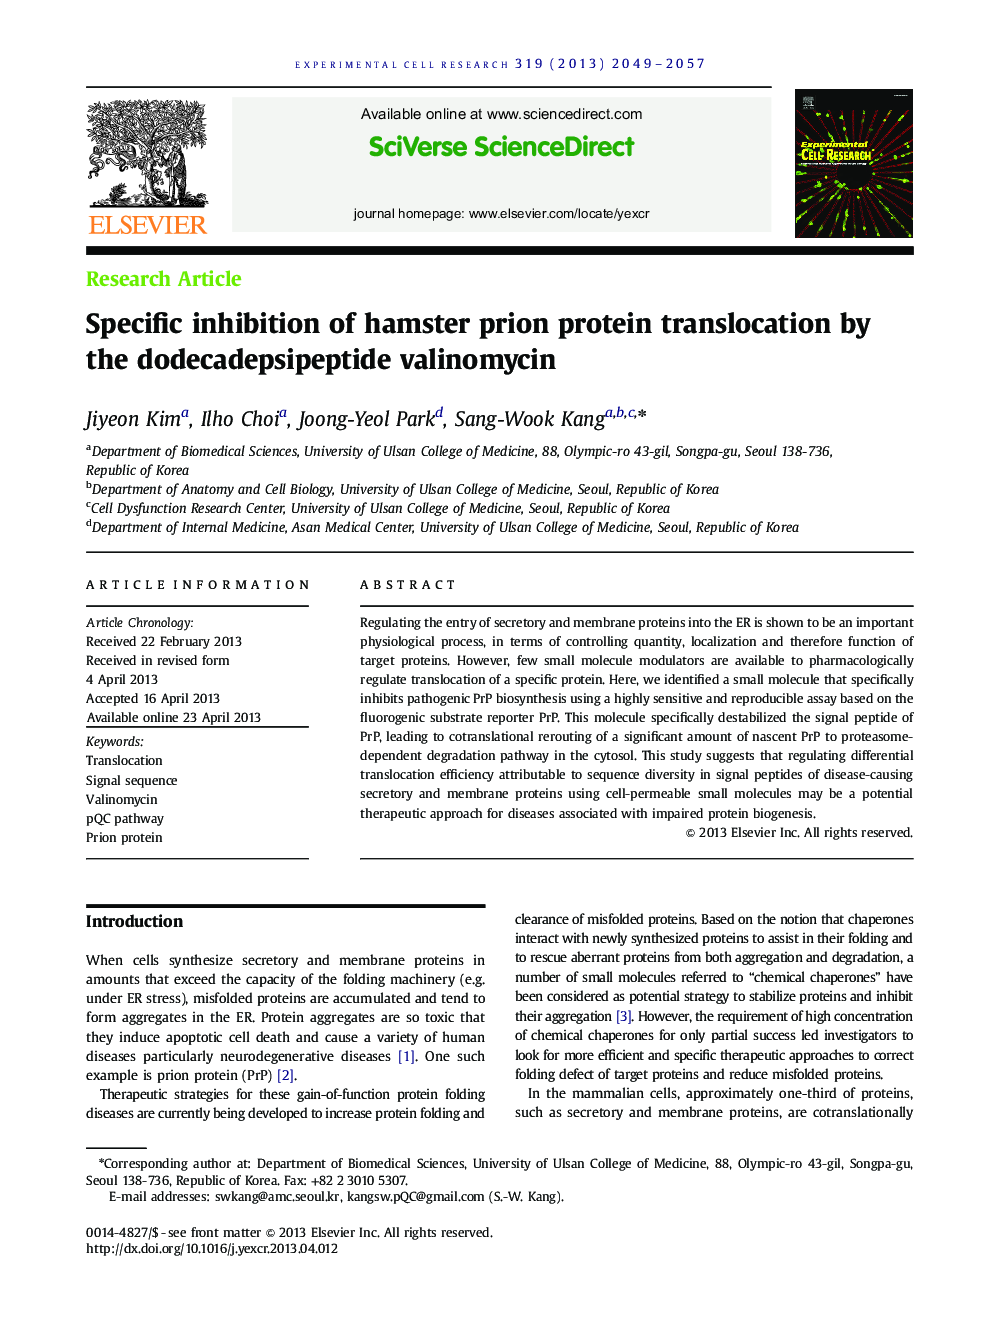 Specific inhibition of hamster prion protein translocation by the dodecadepsipeptide valinomycin